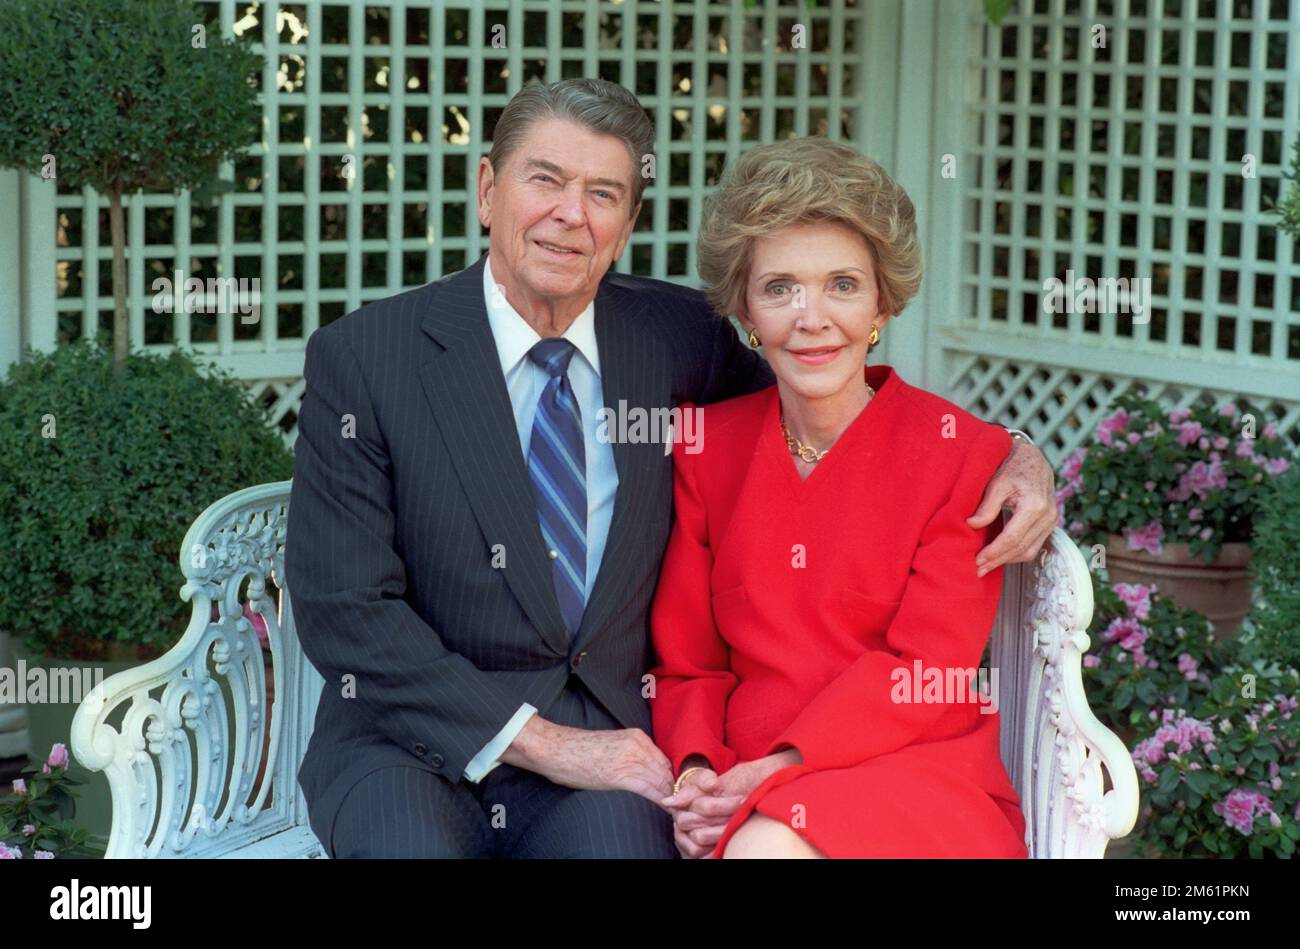 11/16/1988 President Reagan and Nancy Reagan pose on the White House grounds President Ronald Reagan and Nancy Reagan pose on the White House grounds, 1988 Stock Photo